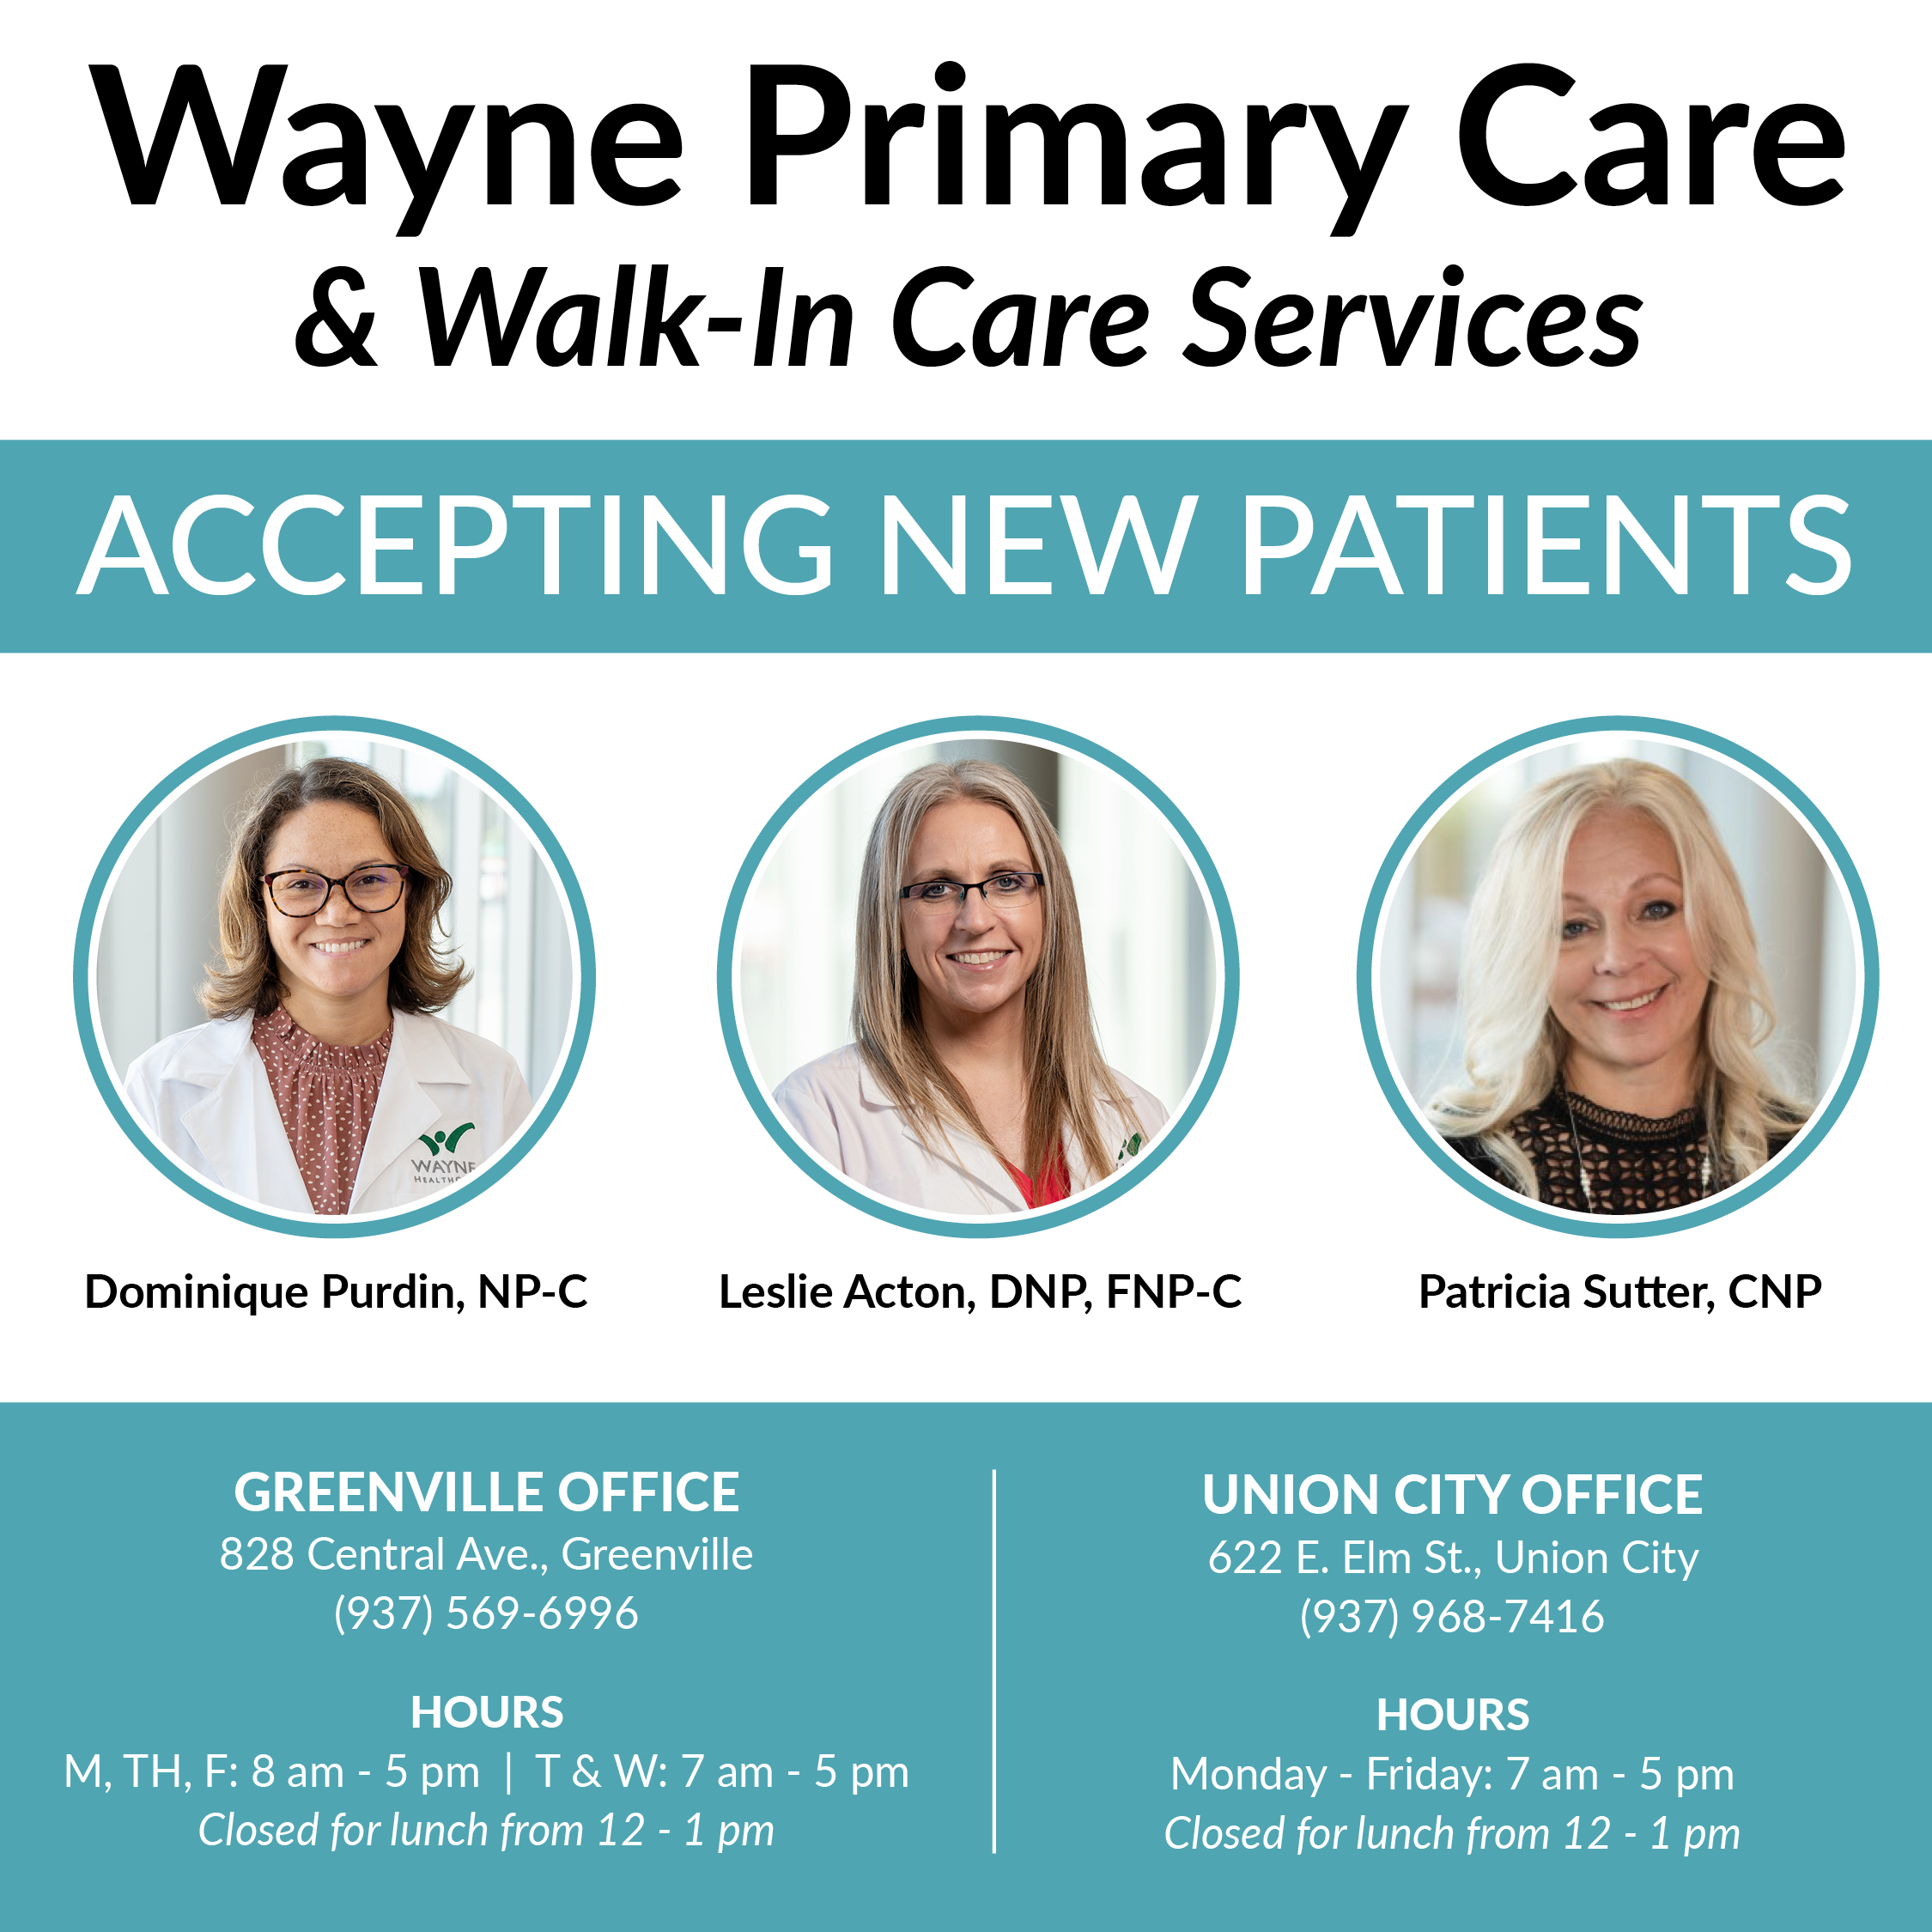 Wayne Primary Care and Walk-In Care Services